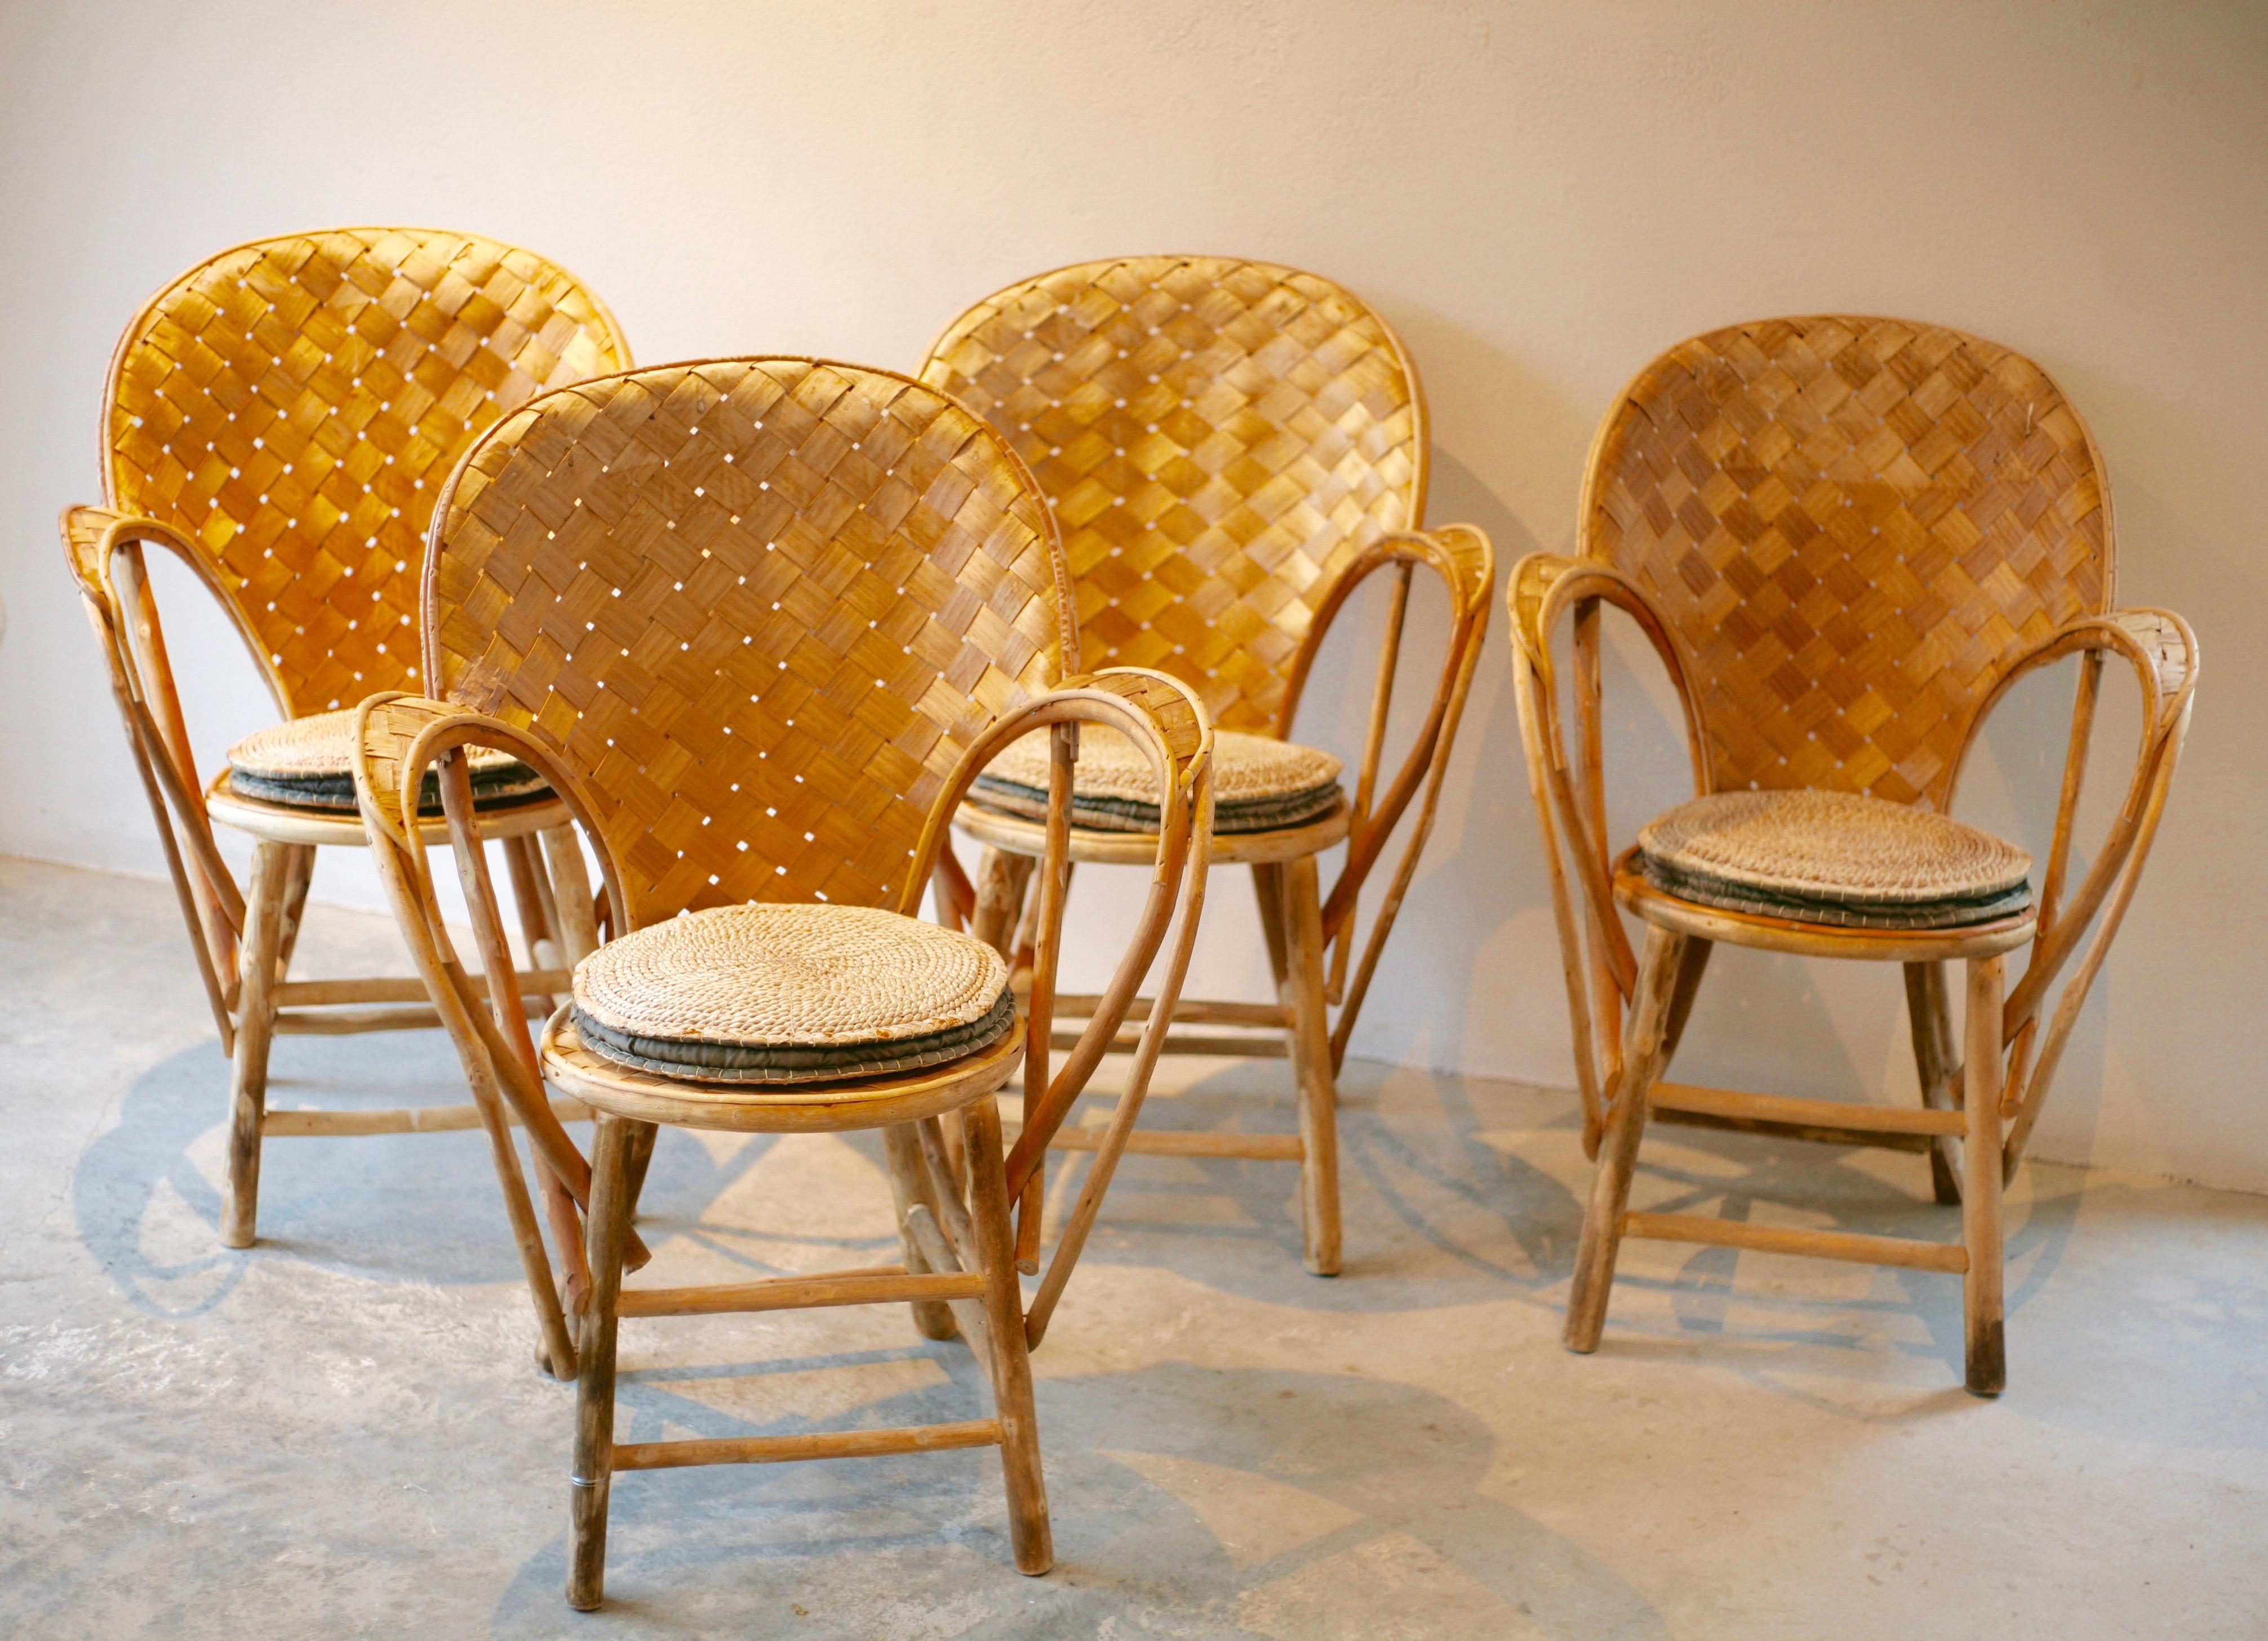 Set of 6 wicker chairs designed by Le Corbusier and being one of his favorites. Handmade in France of pine and chestnut shavings. Still made by the same family that always made them. Since they are handmade the edition always was limited. Two of the